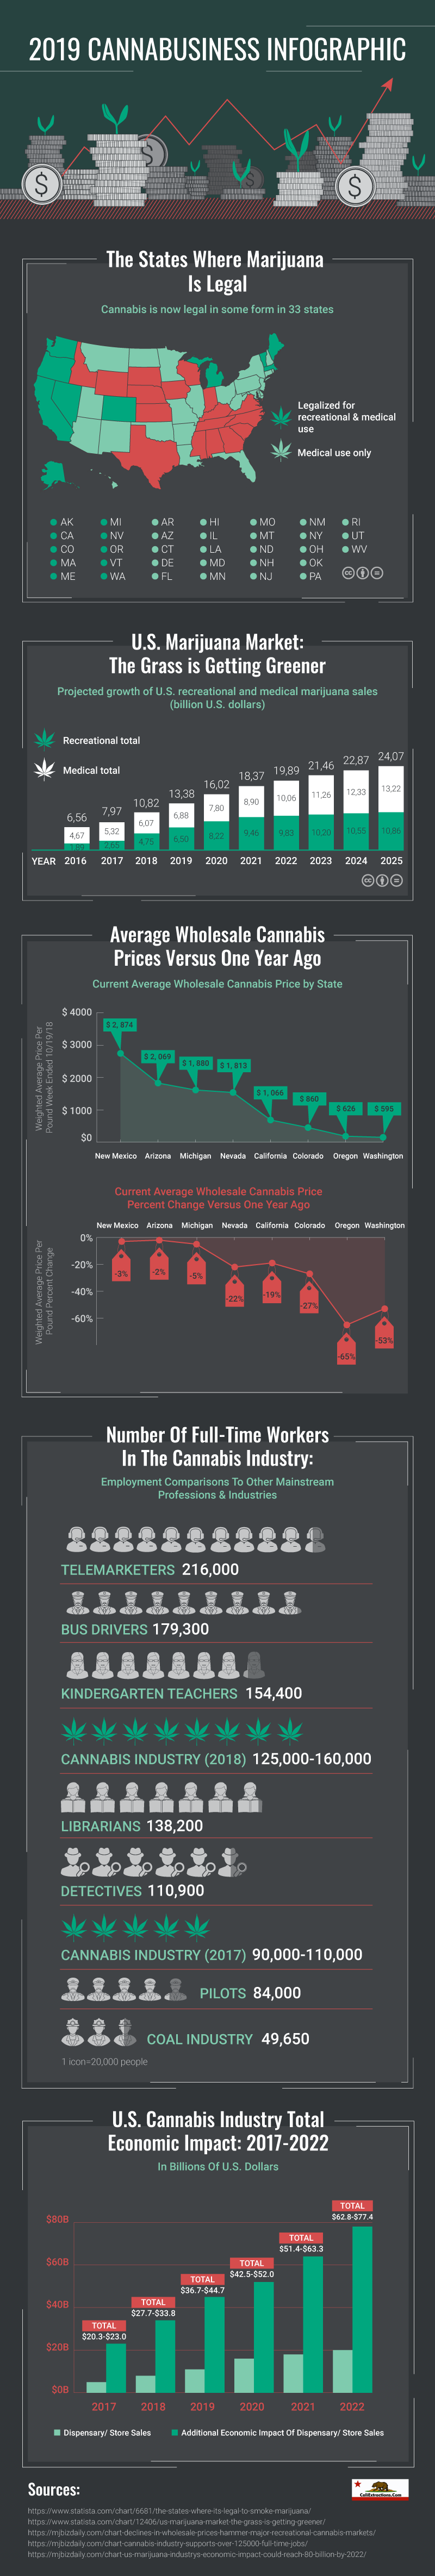 Cannabusiness Infographic Updated January 2019